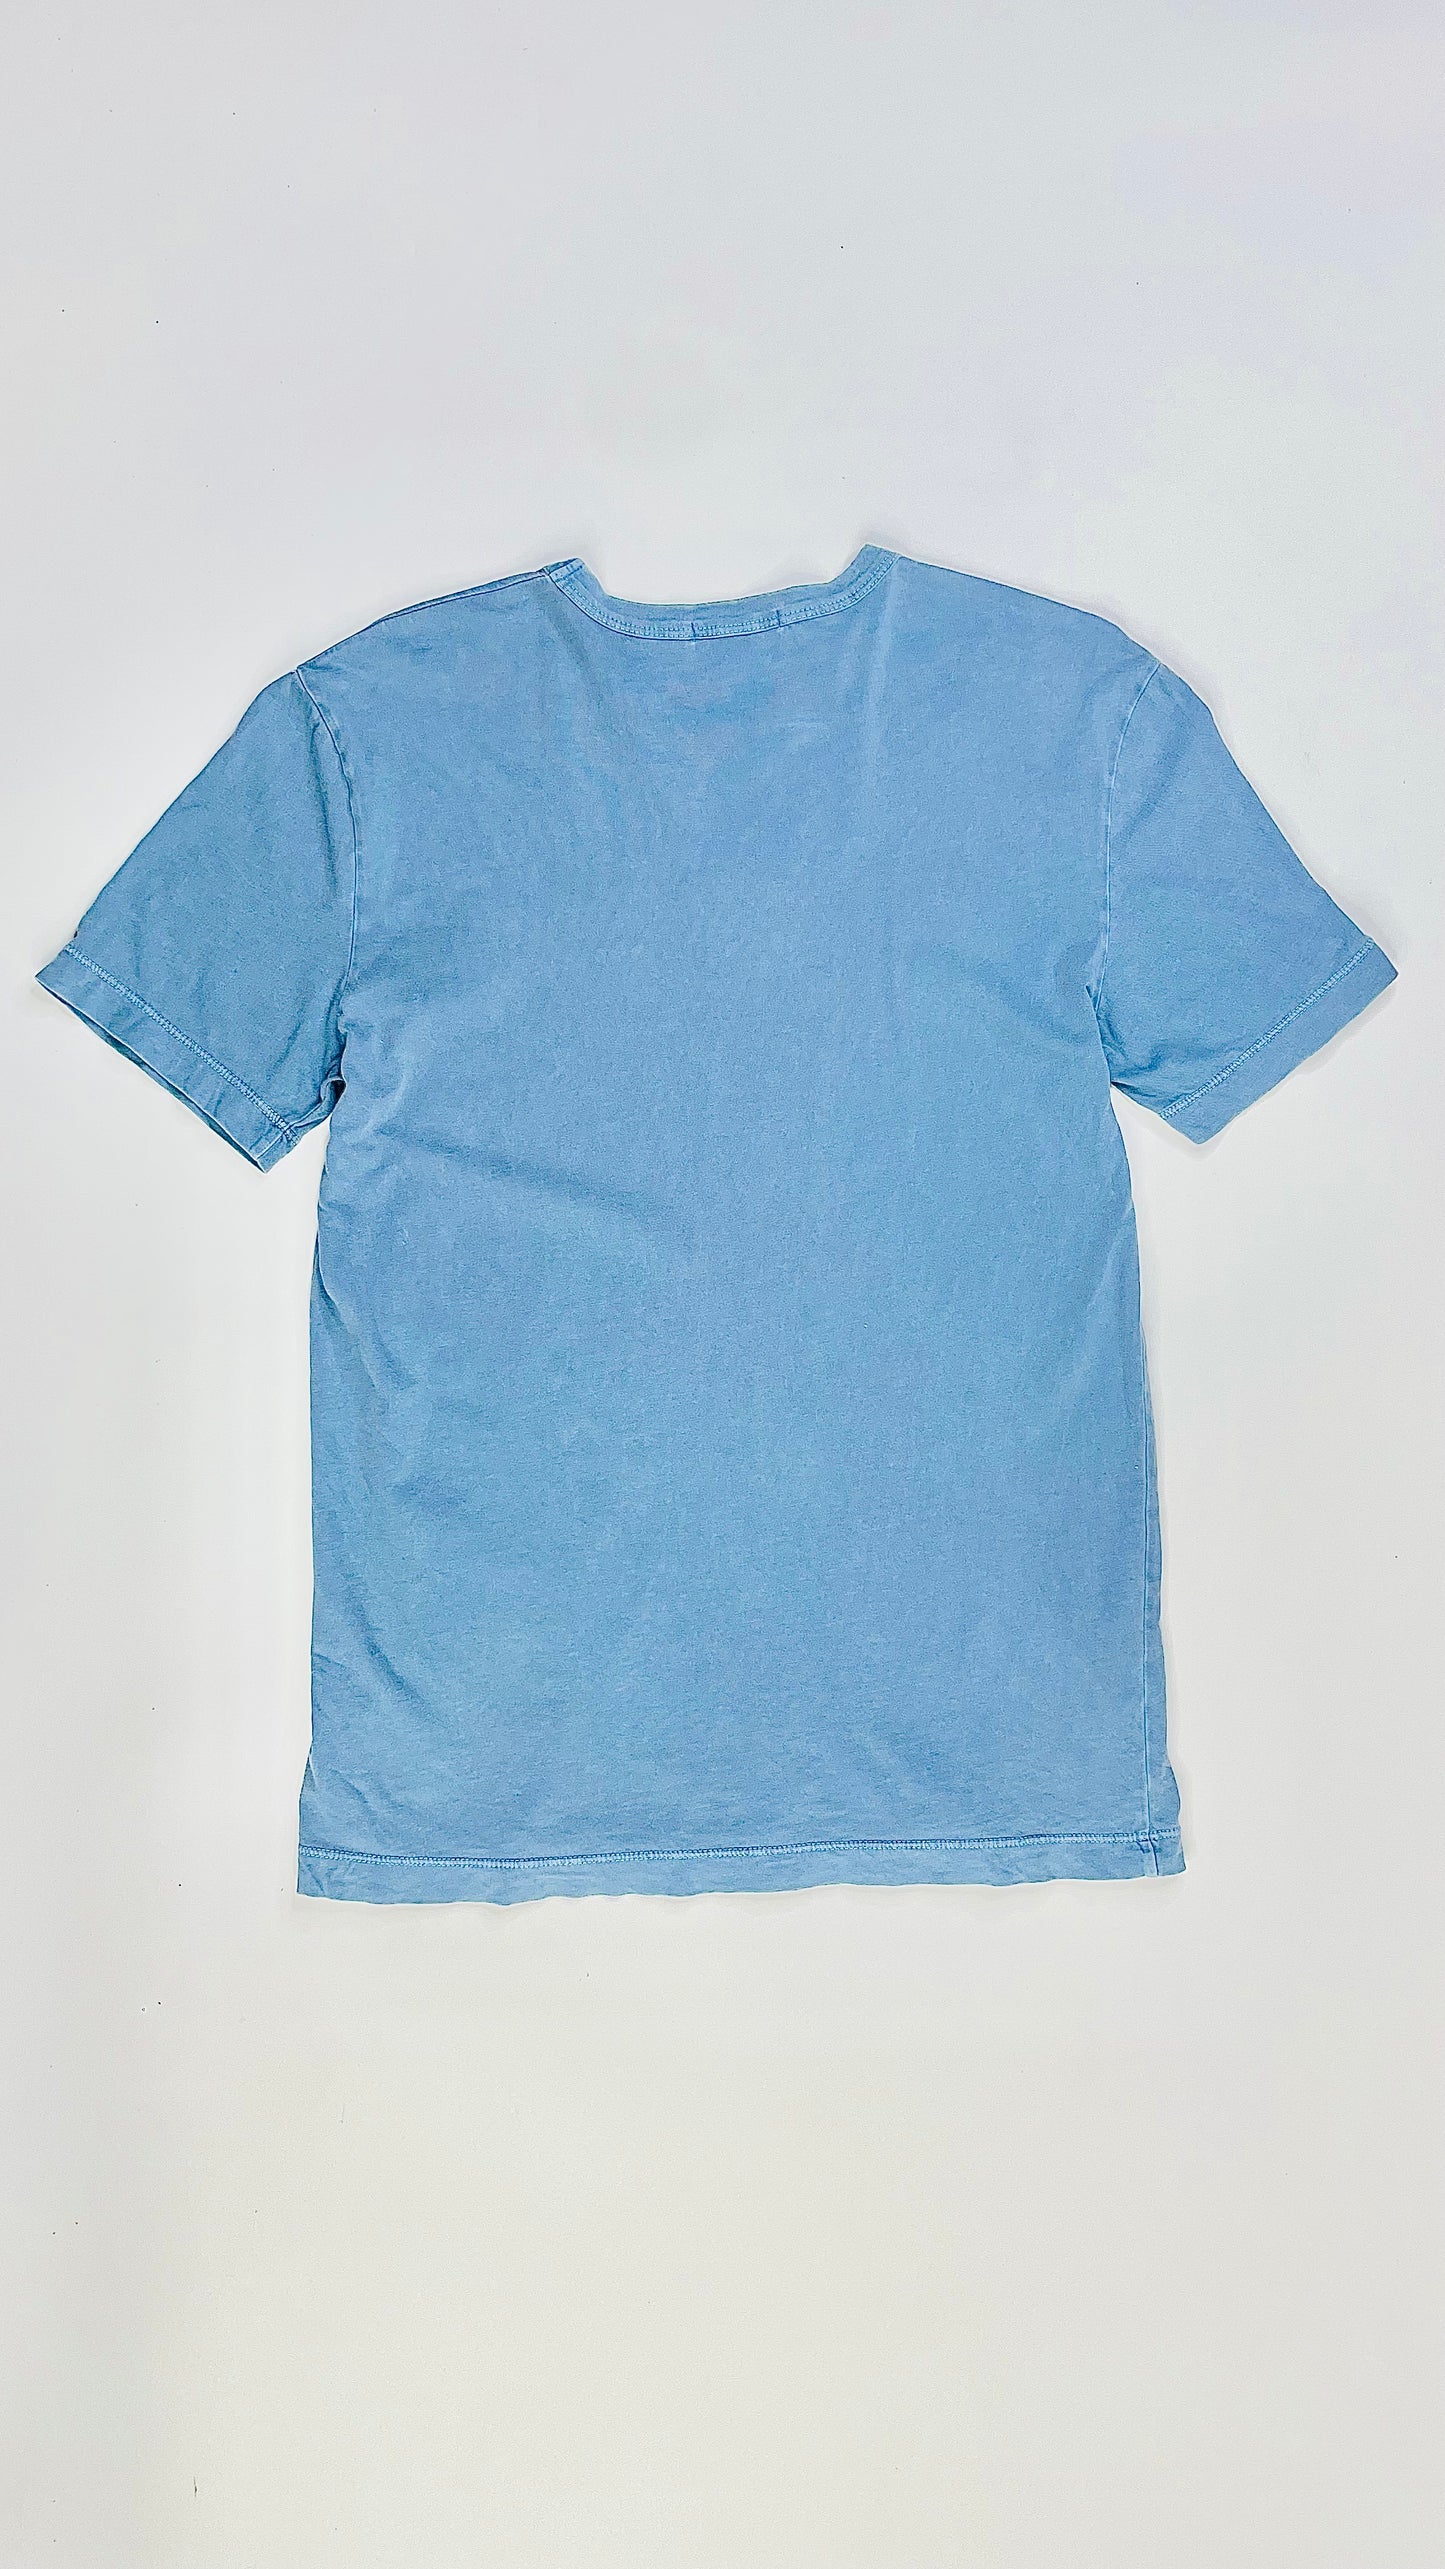 Pre-Loved JAMES PERSE smokey blue t-shirt - Size 1